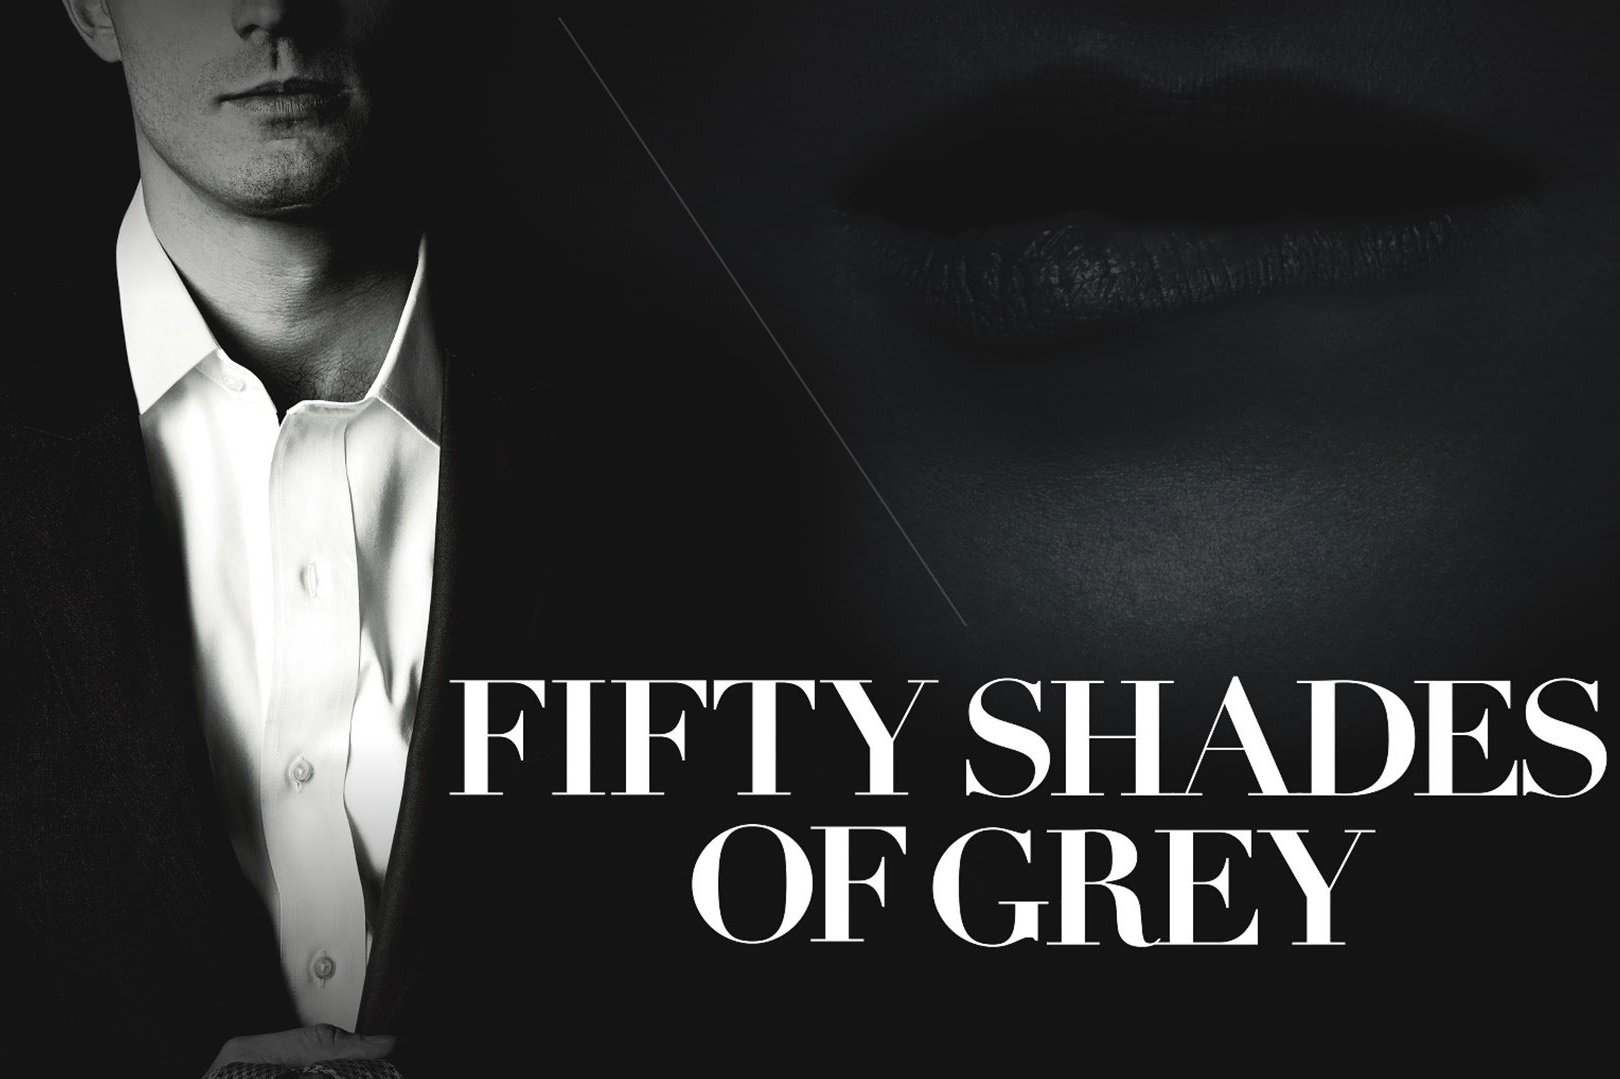 50 shades cropped